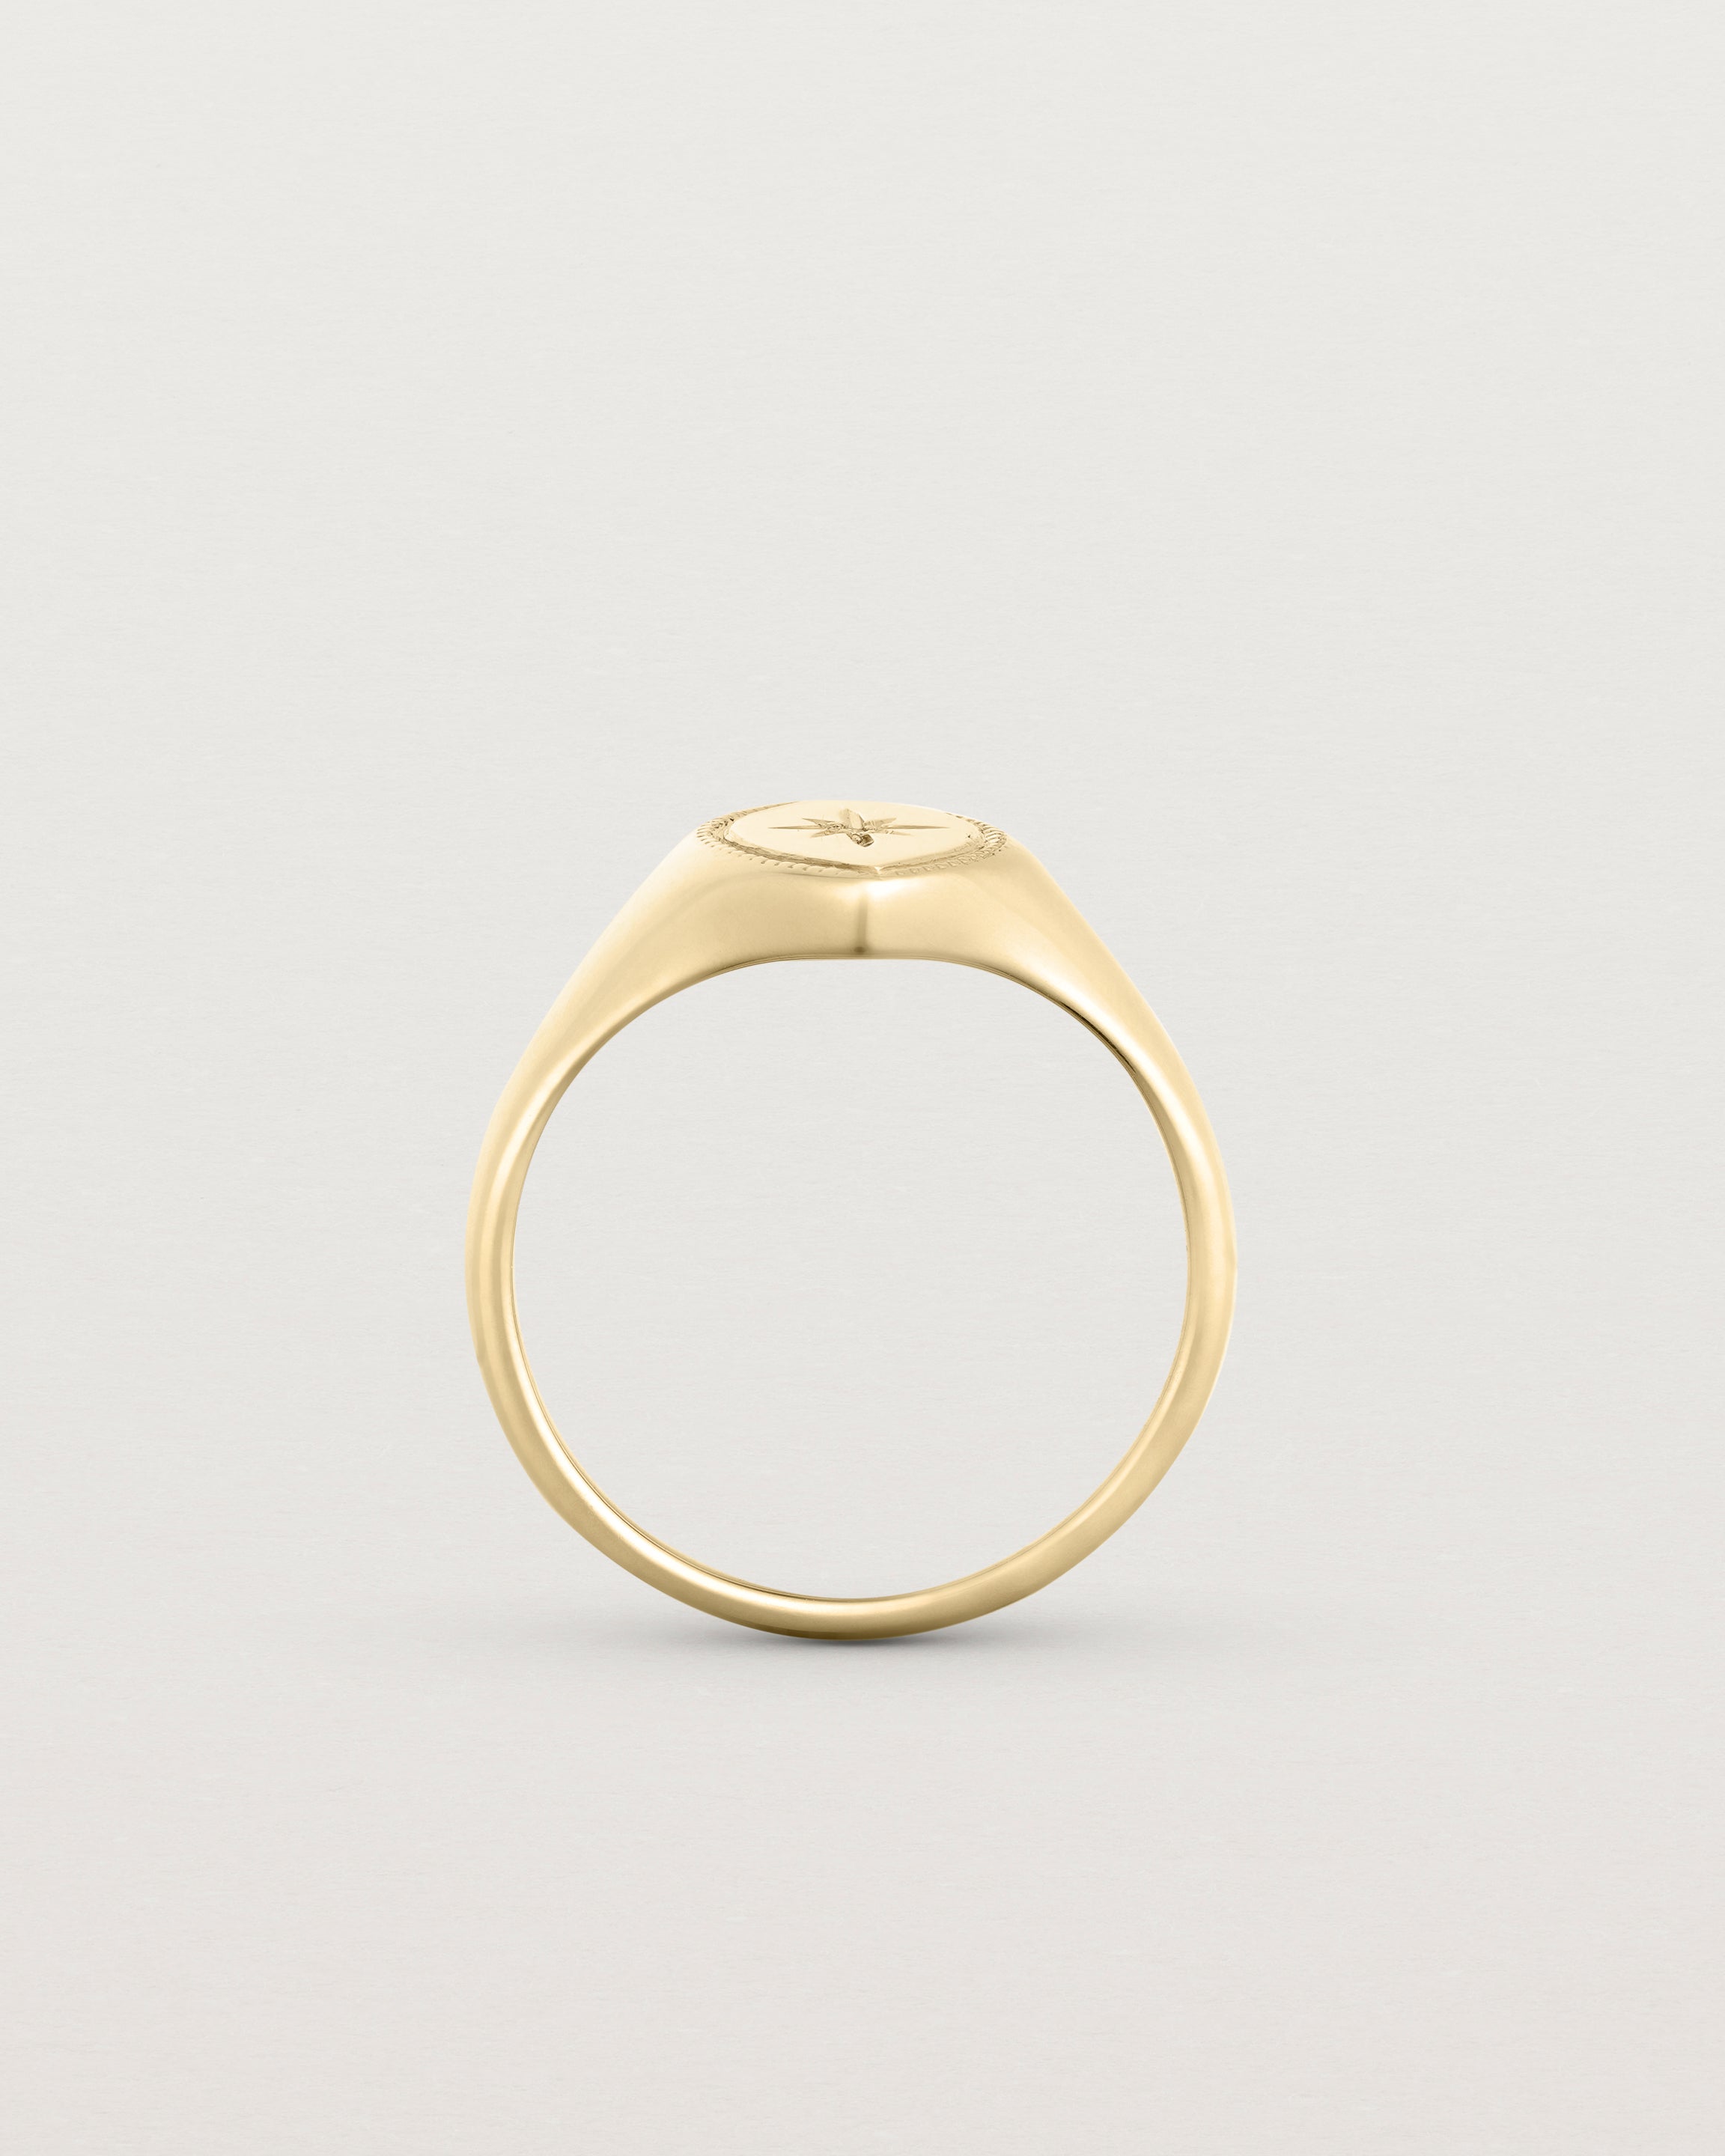 Standing view of the Willow Millgrain Signet Ring | Birthstone in yellow gold.